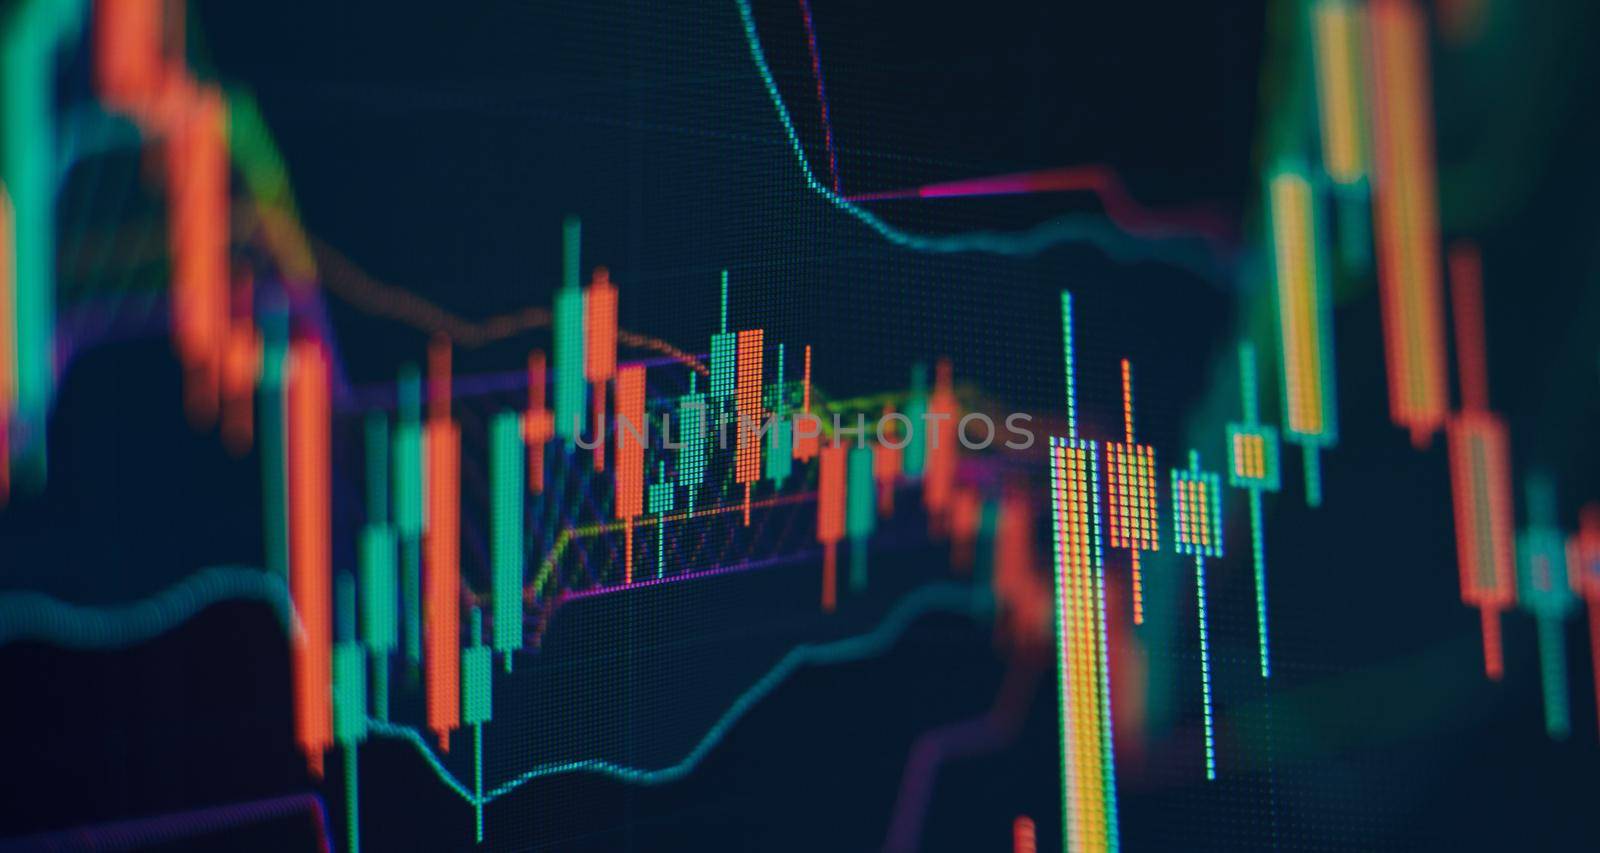 Abstract financial graph with candle stick and bar chart of stock market on financialbackground by Maximusnd